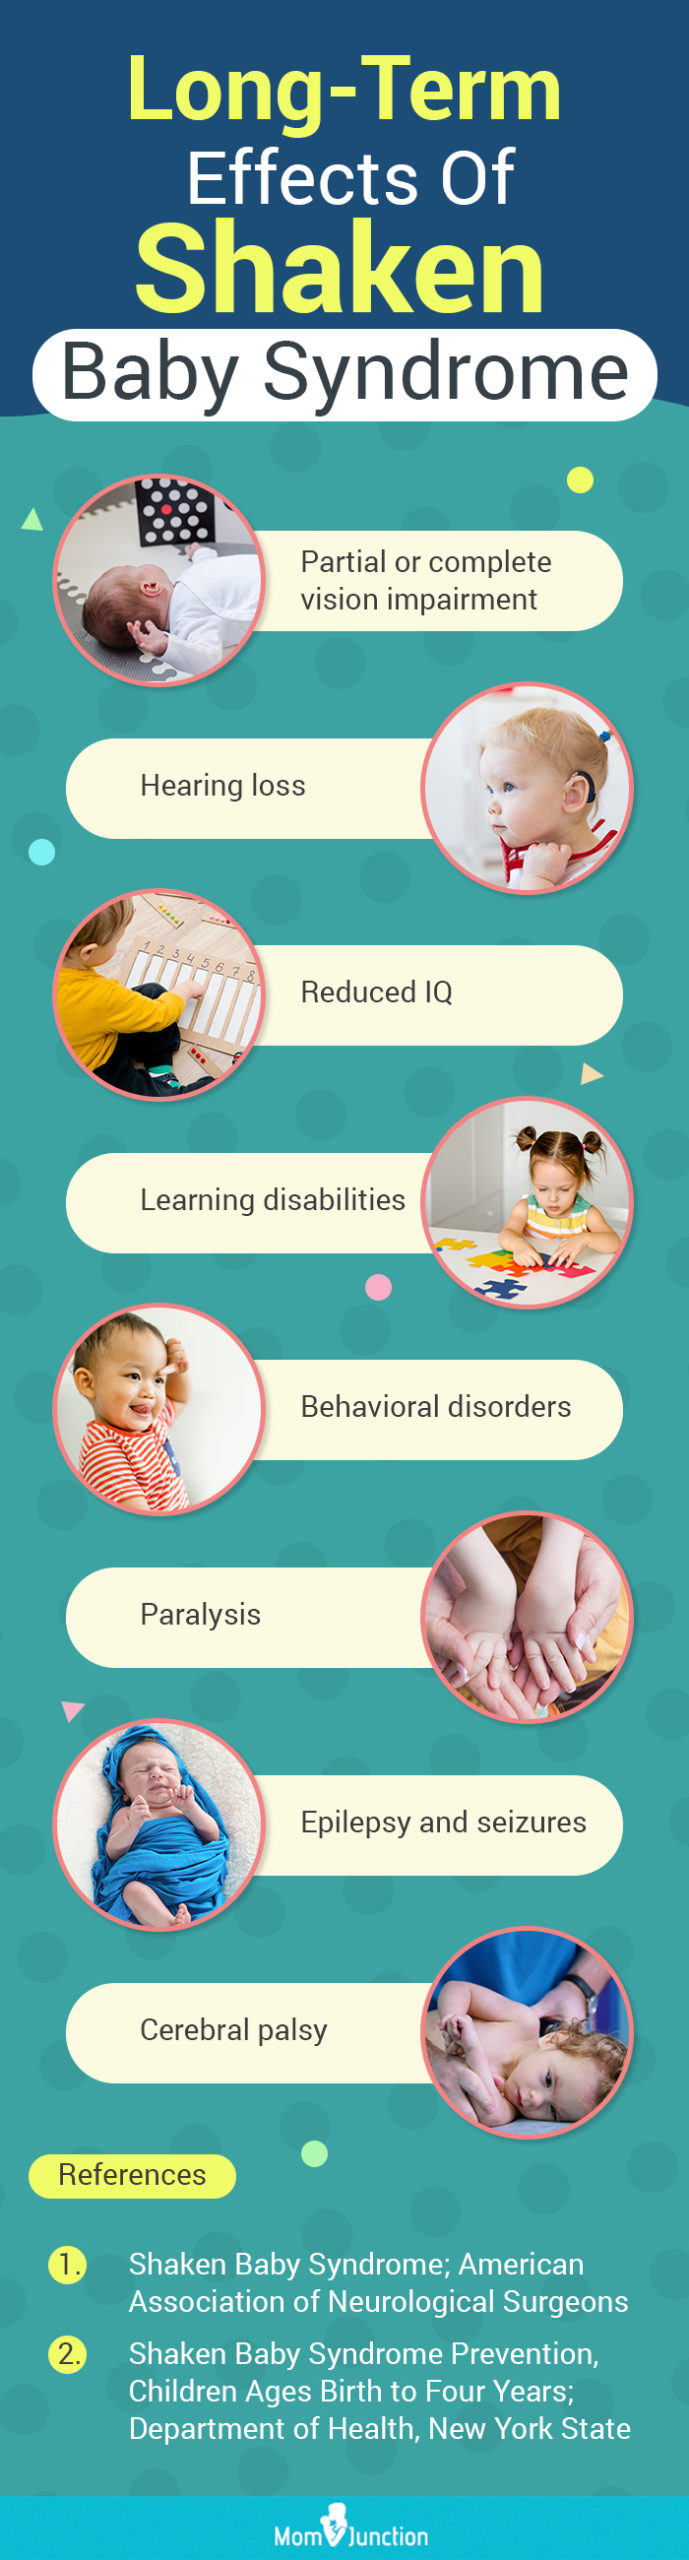 effects of shaken baby syndrome (infographic)